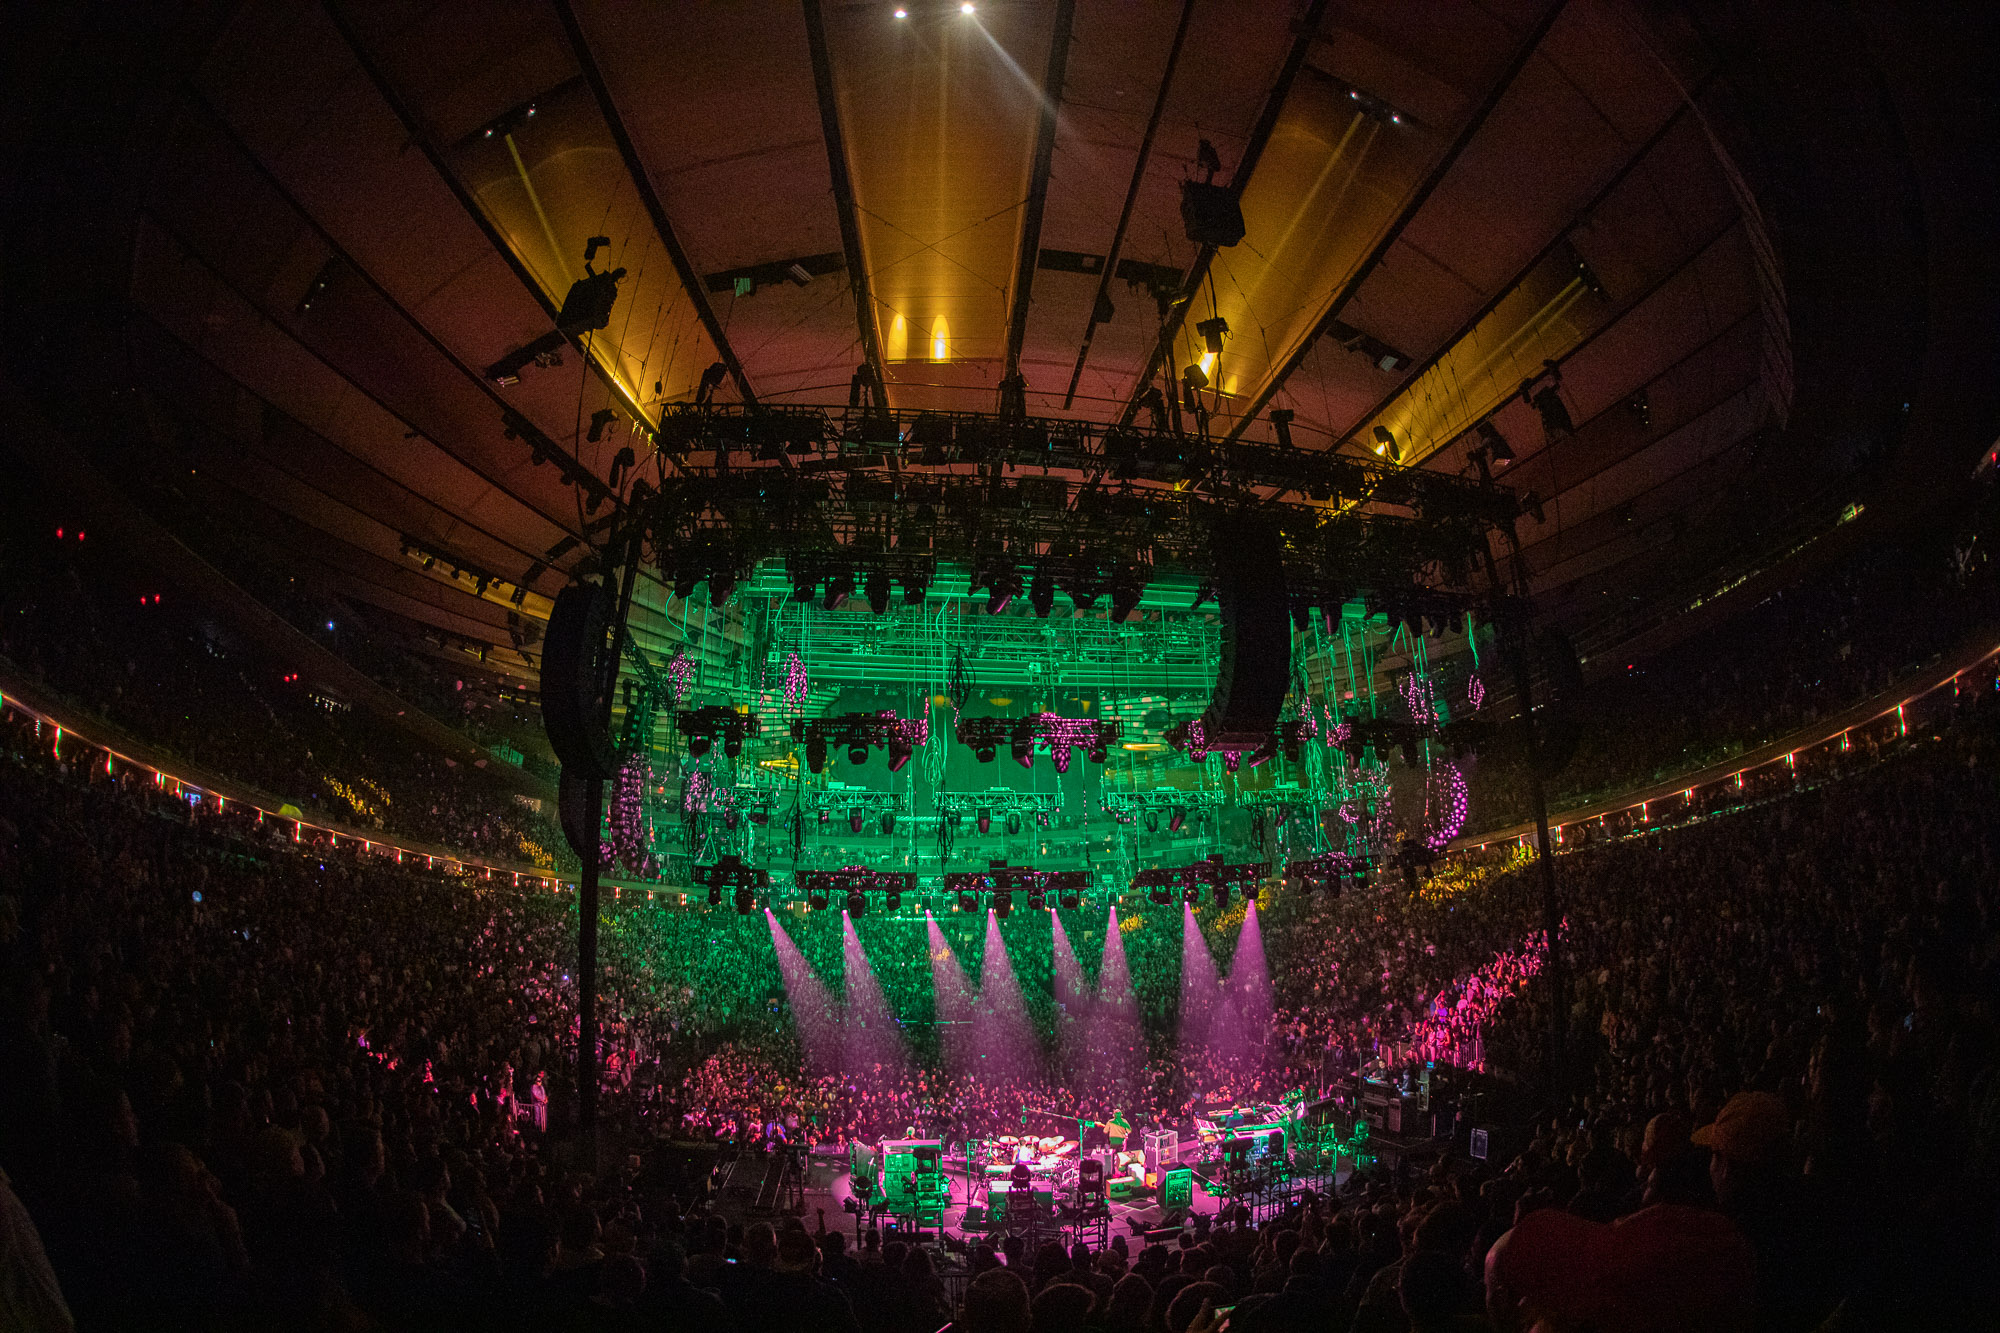 Phish Perform "Gamehendge" for the First Time Since 1994 at MSG